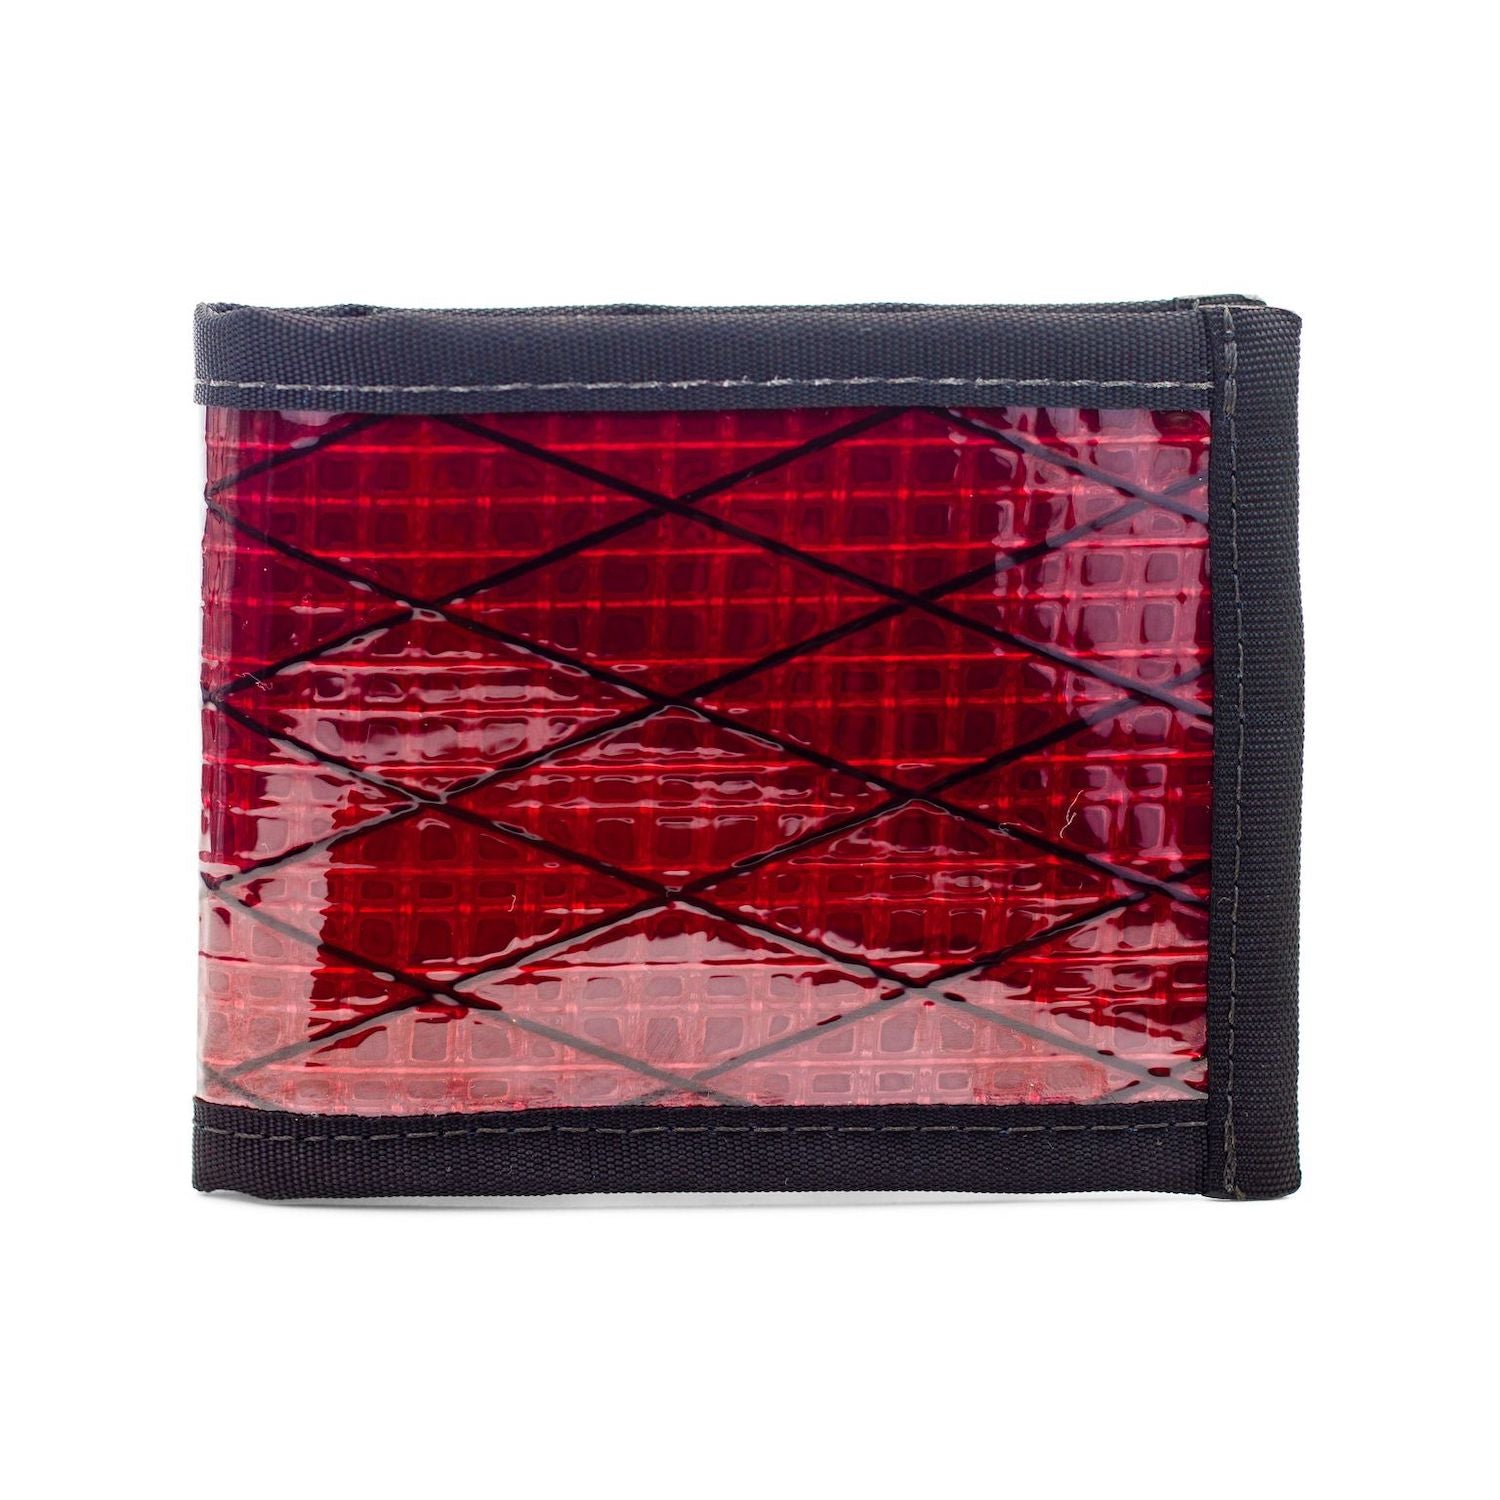 Flowfold Recycled Sailcloth Vanguard Bifold Wallet Made in USA, Maine by Flowfold Red Womens Minimalist Wallet